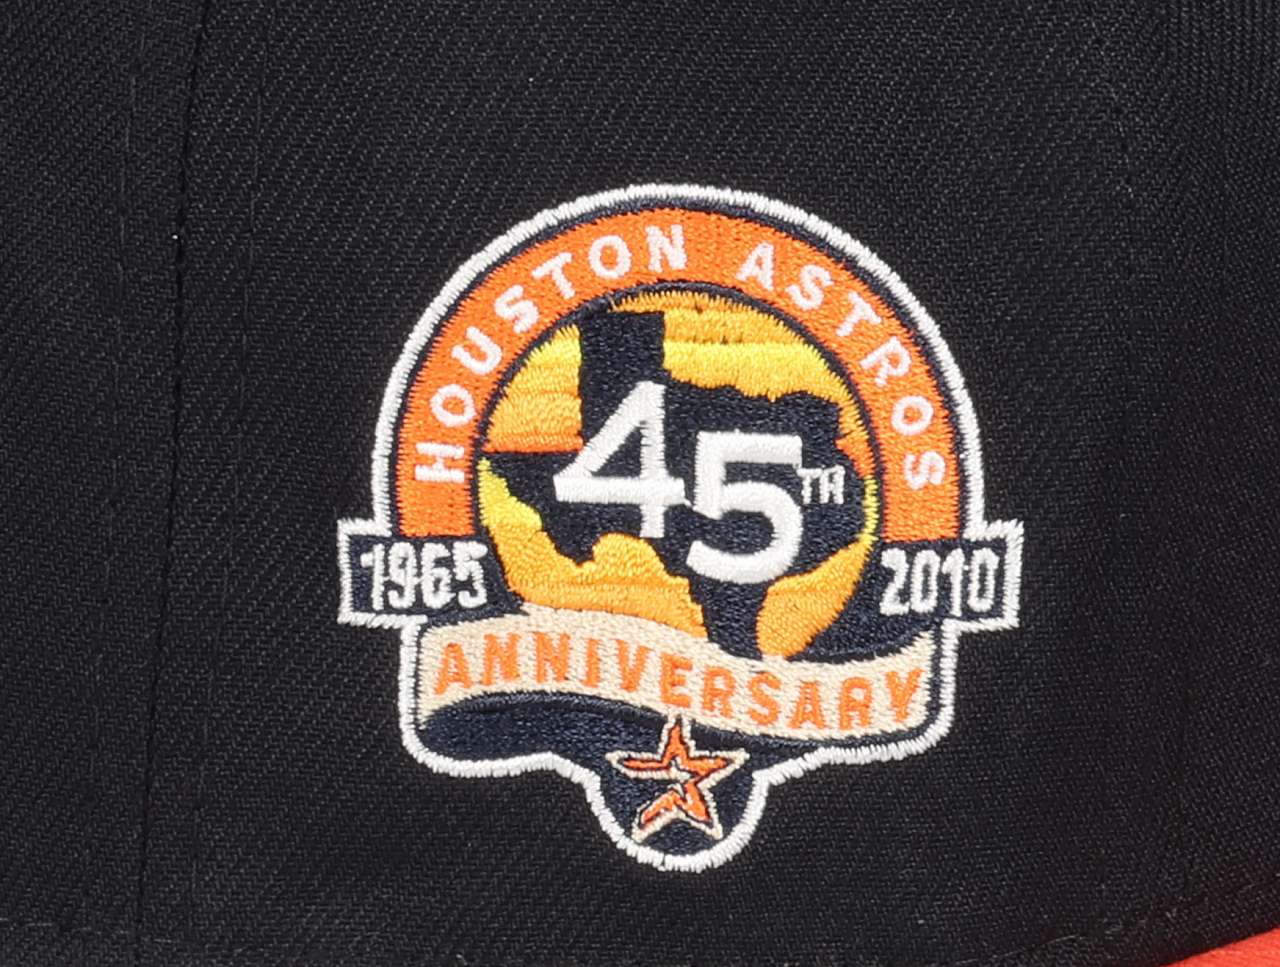 Houston Astros MLB Cooperstown 45th Anniversary Sidepatch Navy Orange 59Fifty Basecap New Era